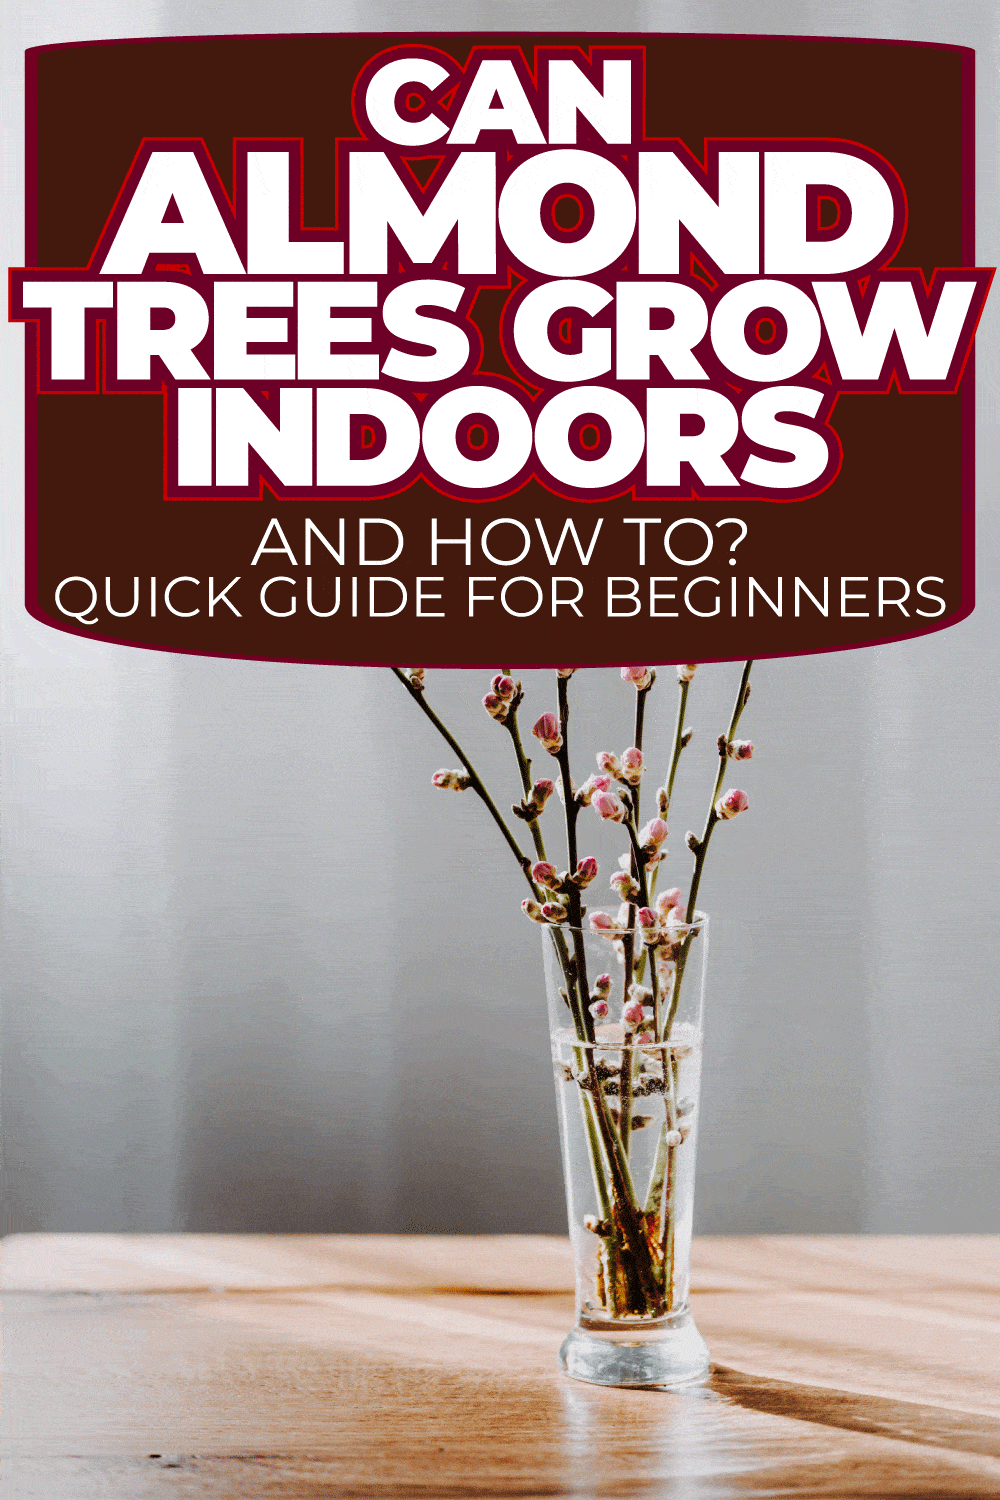 Can Almond Trees Grow Indoors [And How To] (Quick Guide For Beginners)